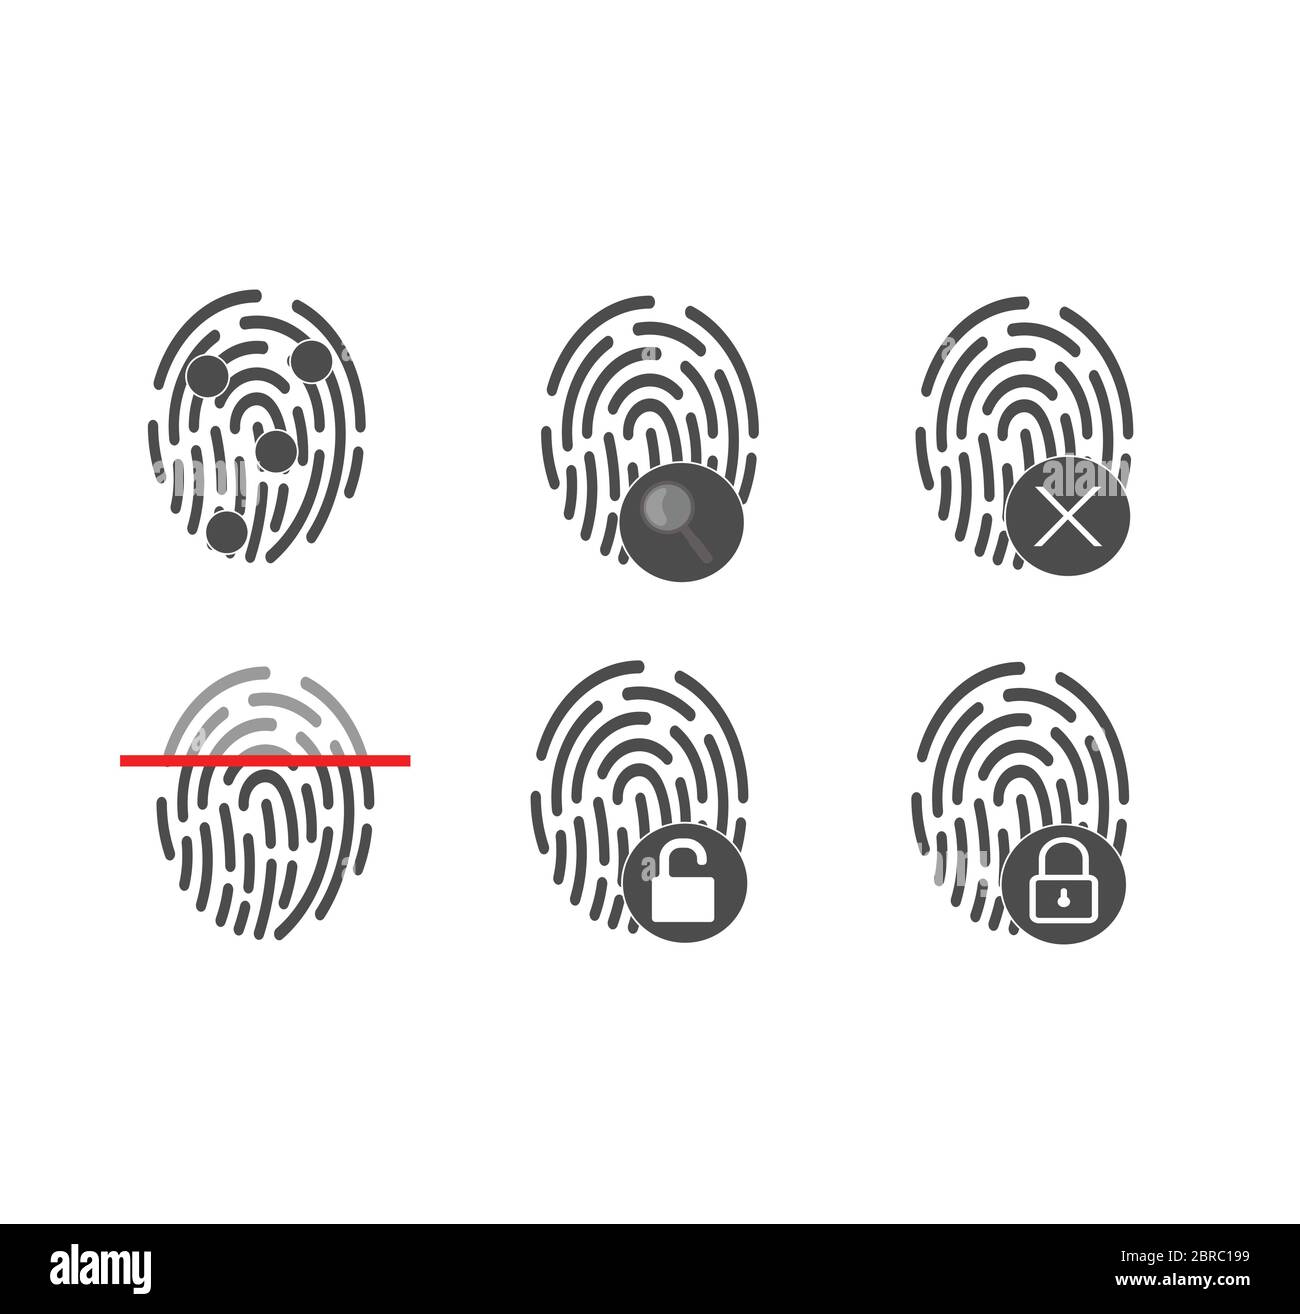 Fingerprints - identification and unlock, large vector set of icons Stock Vector